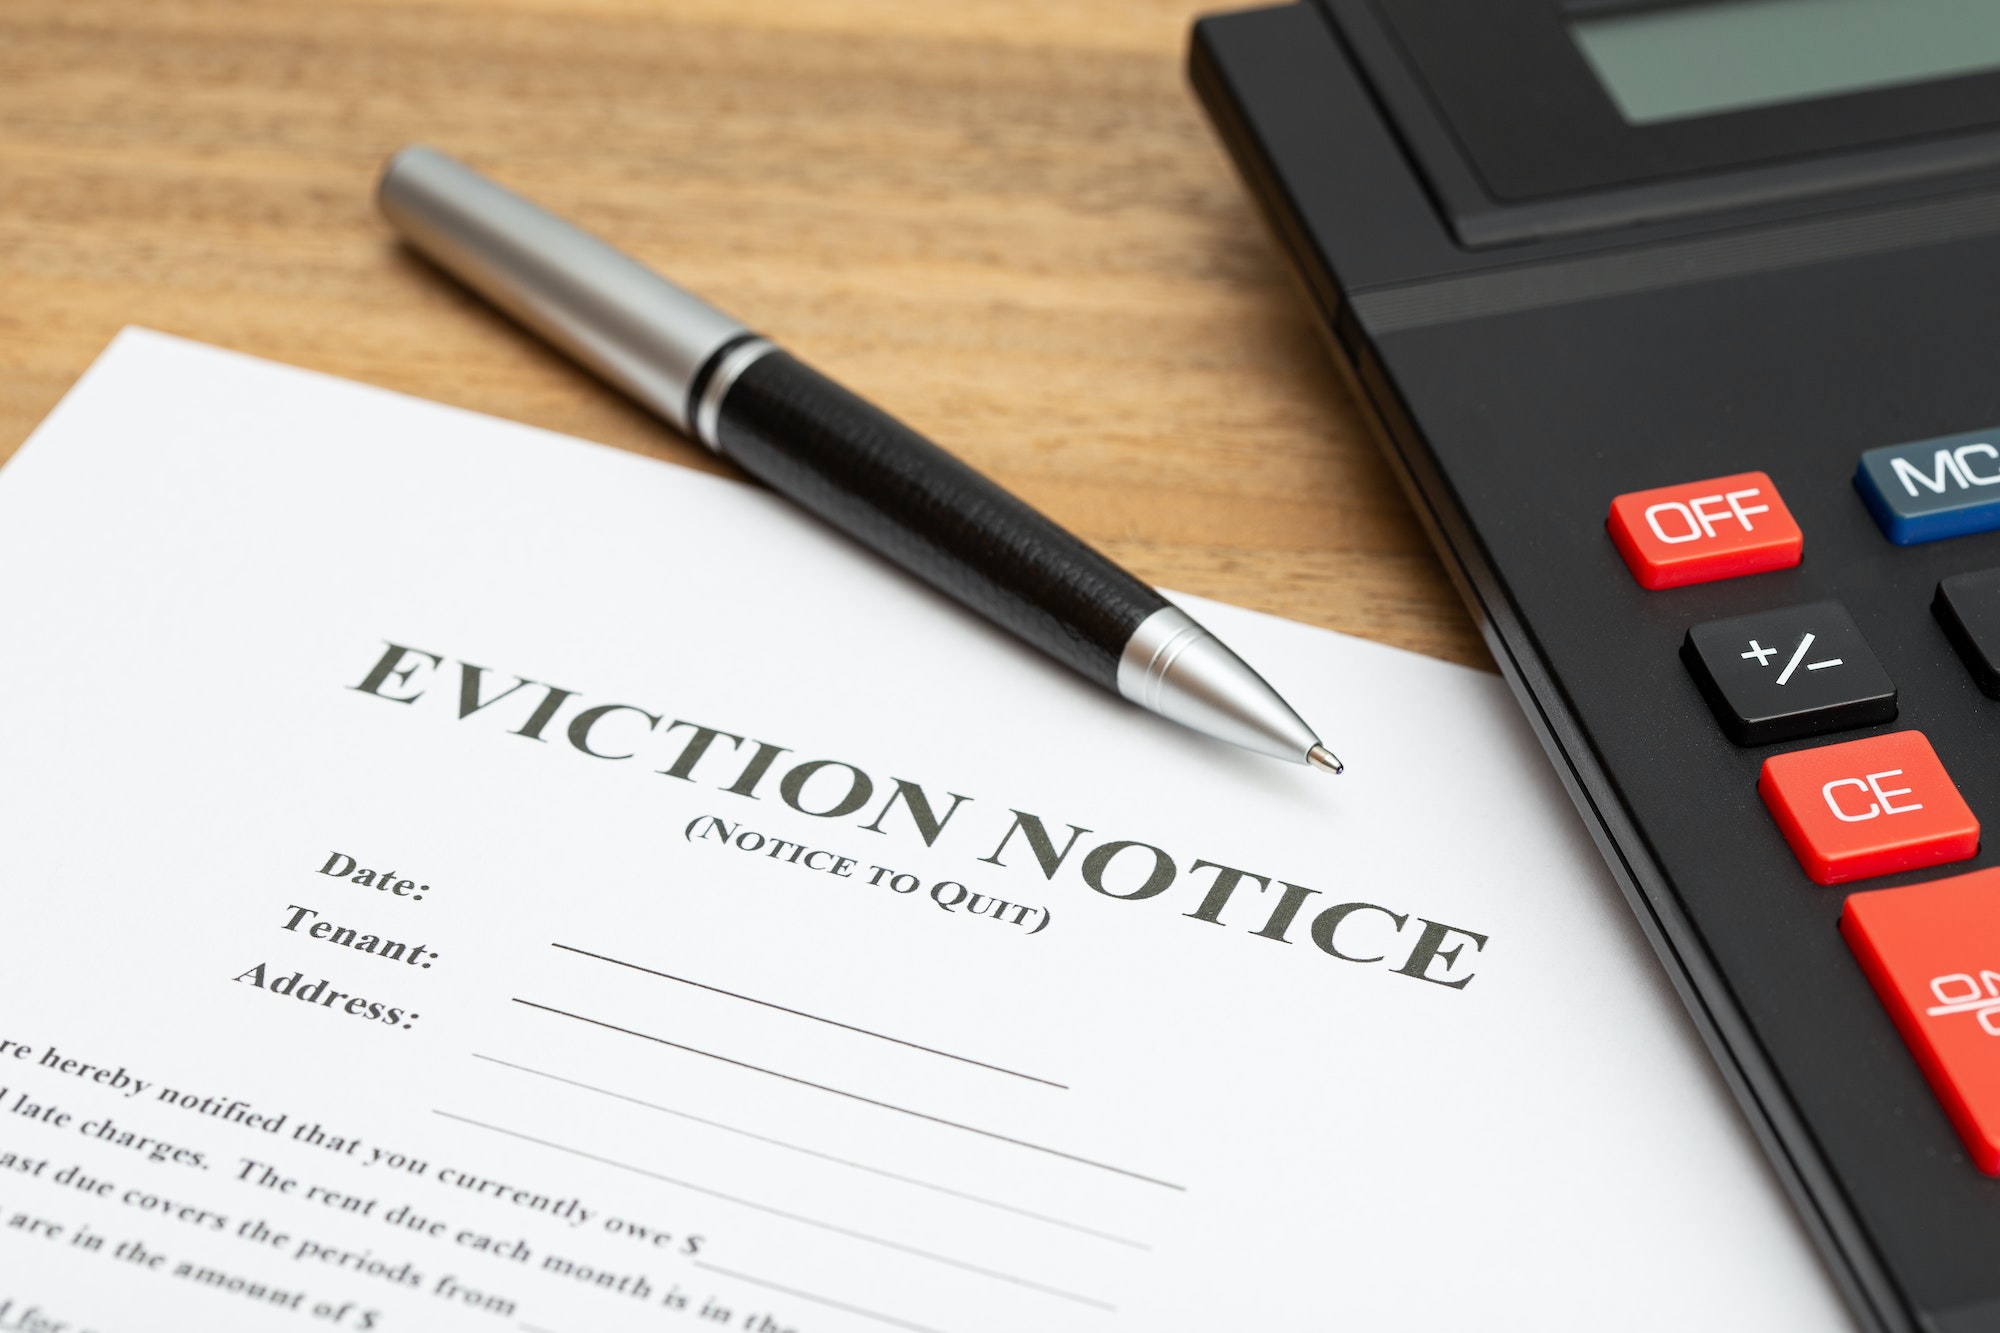 On what grounds can I evict my tenant?